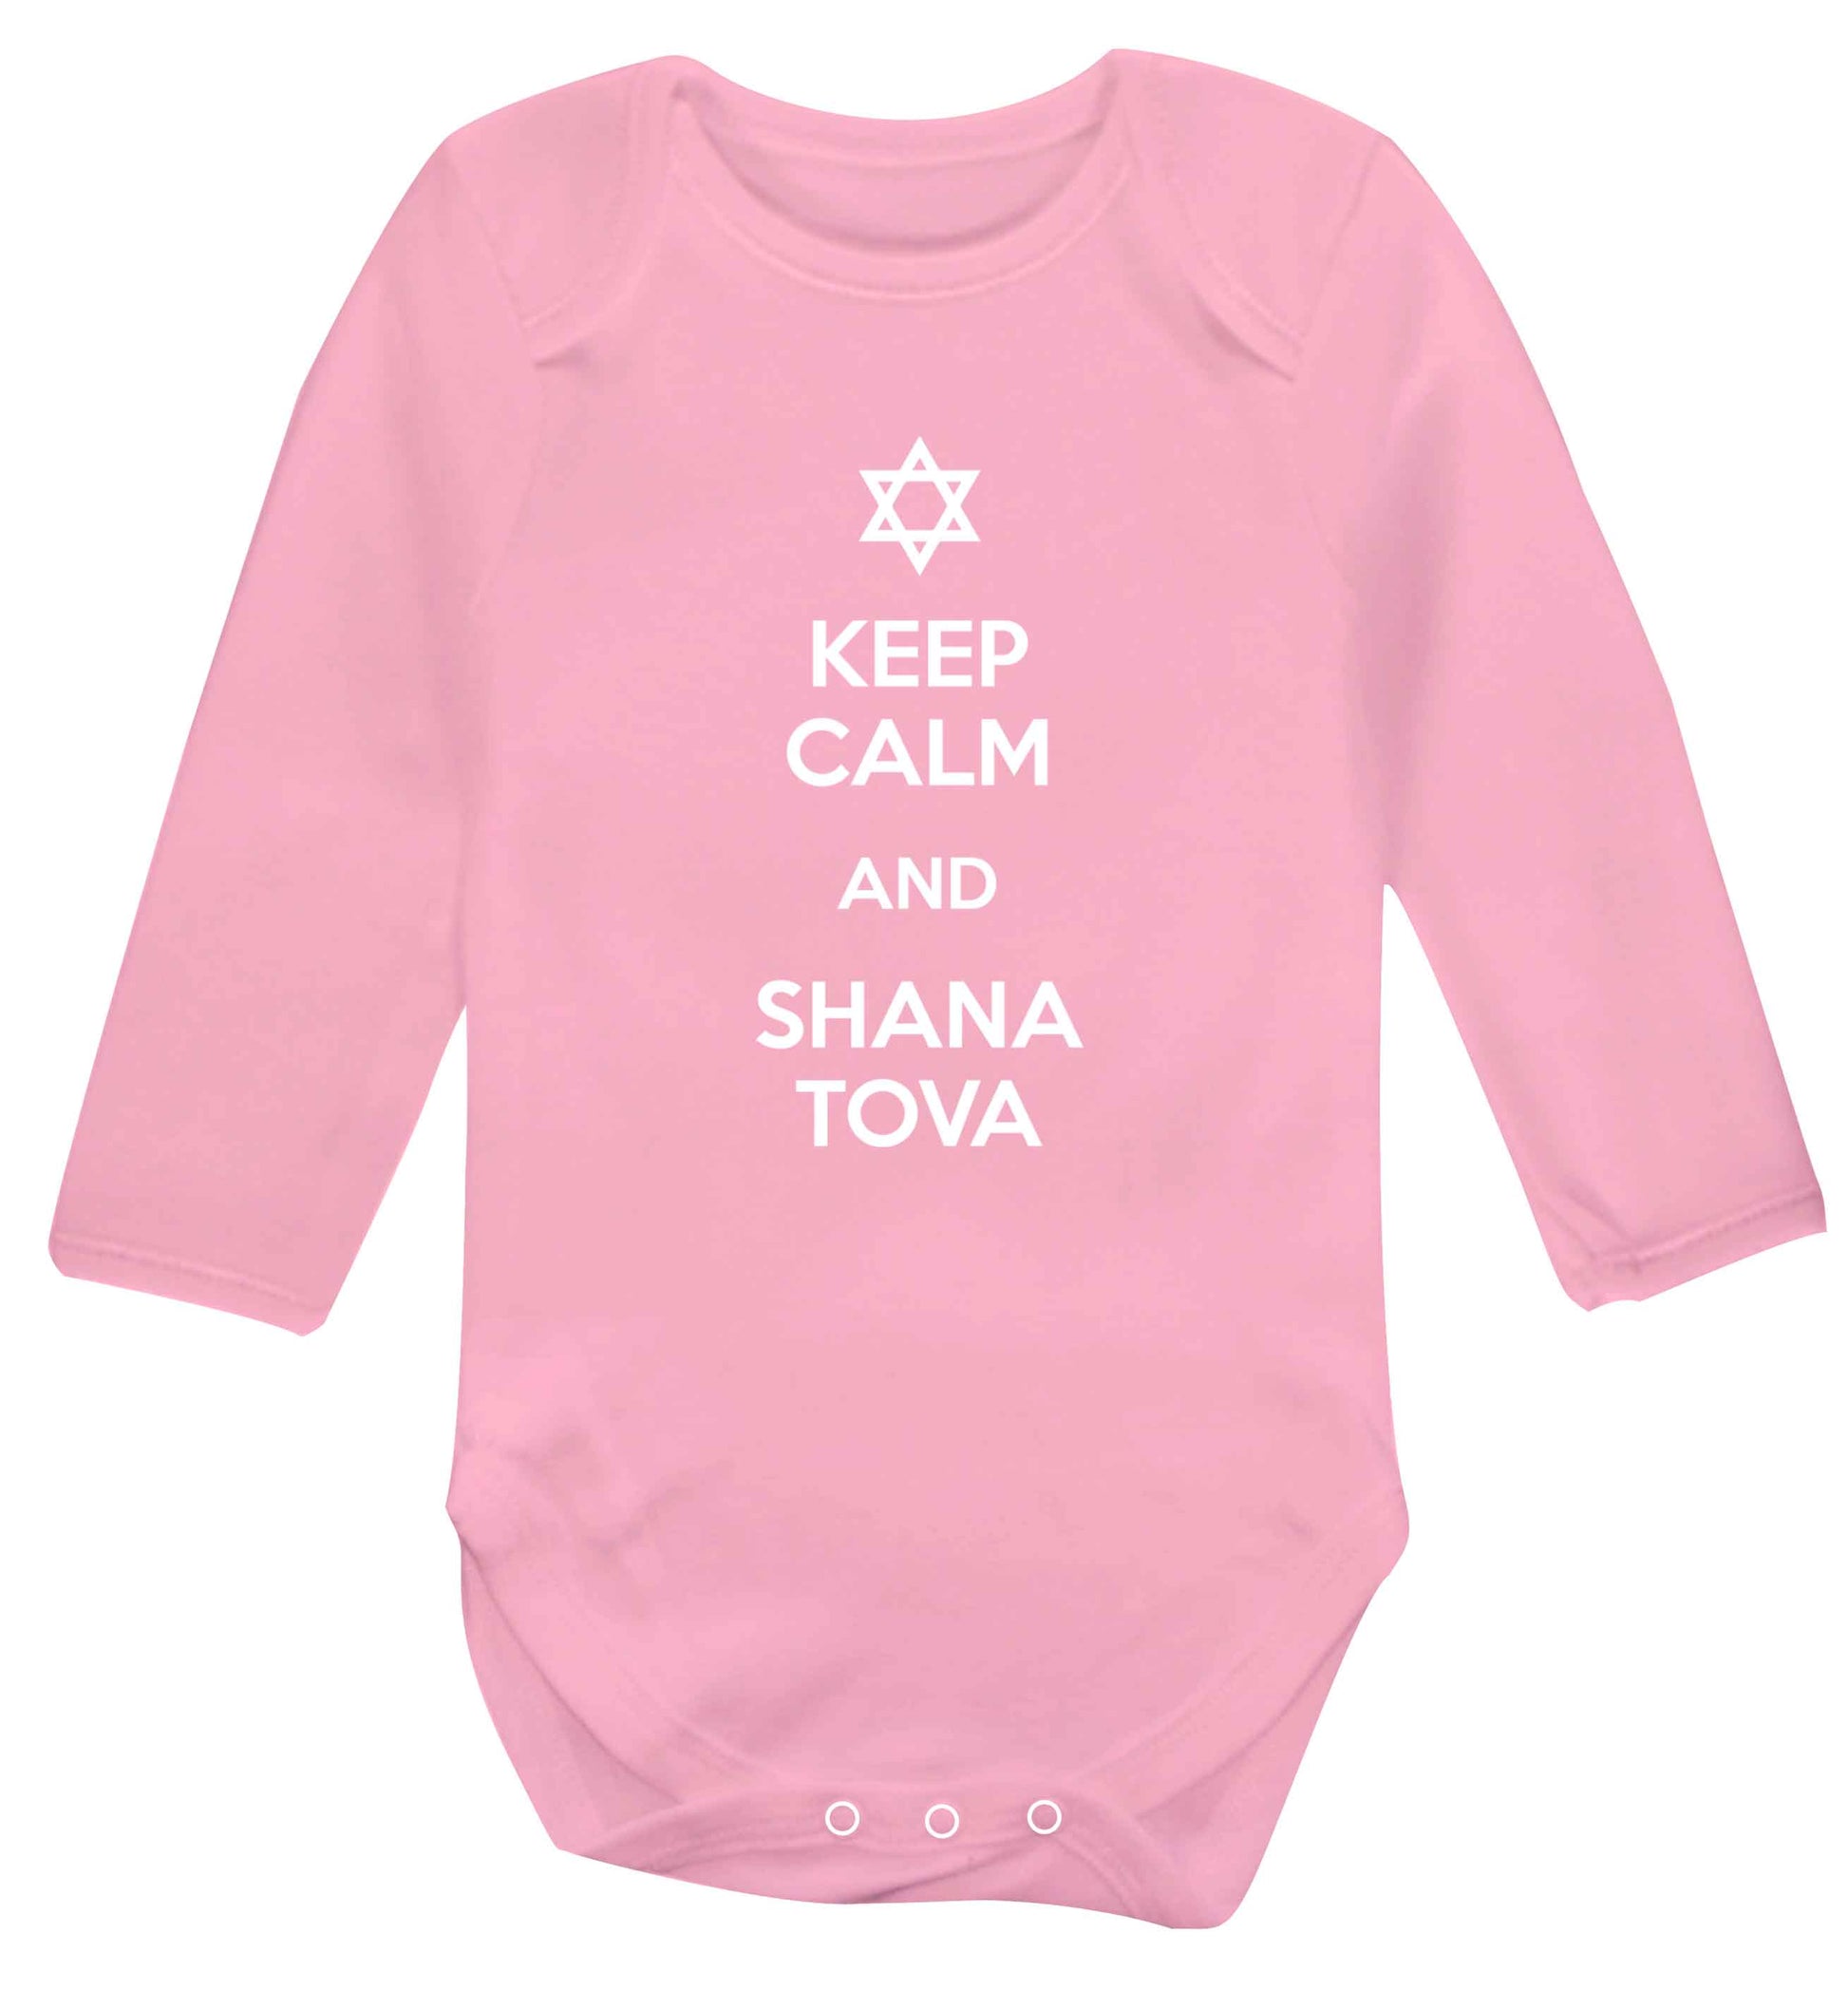 Keep calm and shana tova Baby Vest long sleeved pale pink 6-12 months